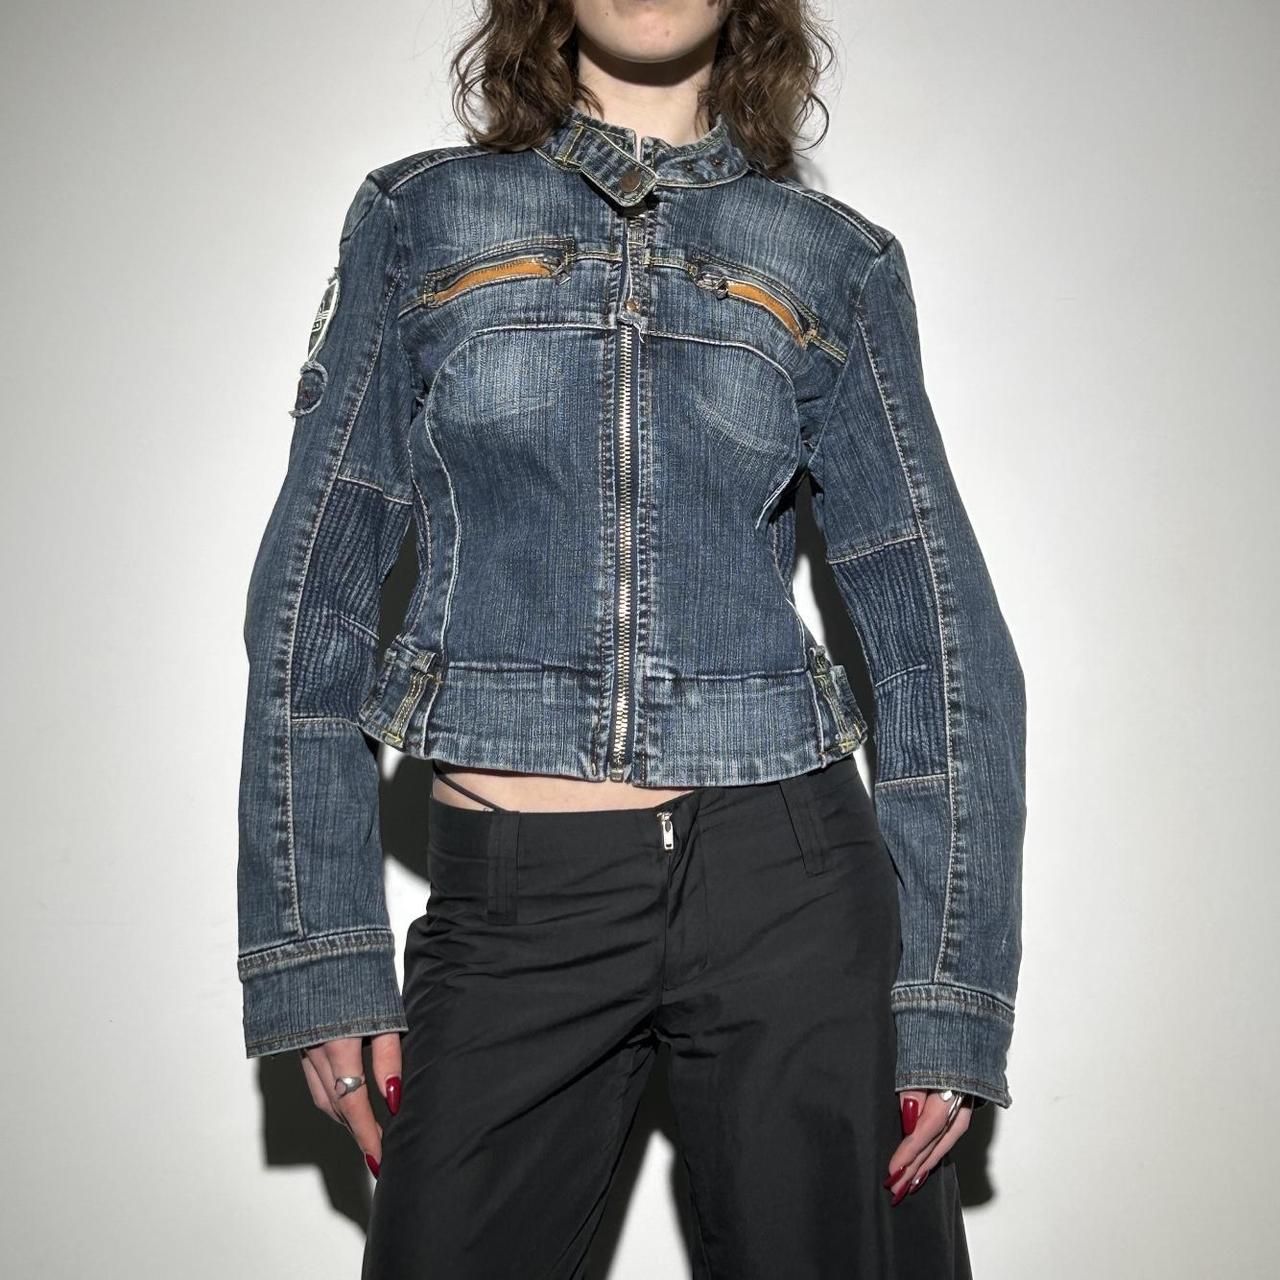 The Timeless Appeal of the Denim
Motorcycle Jacket